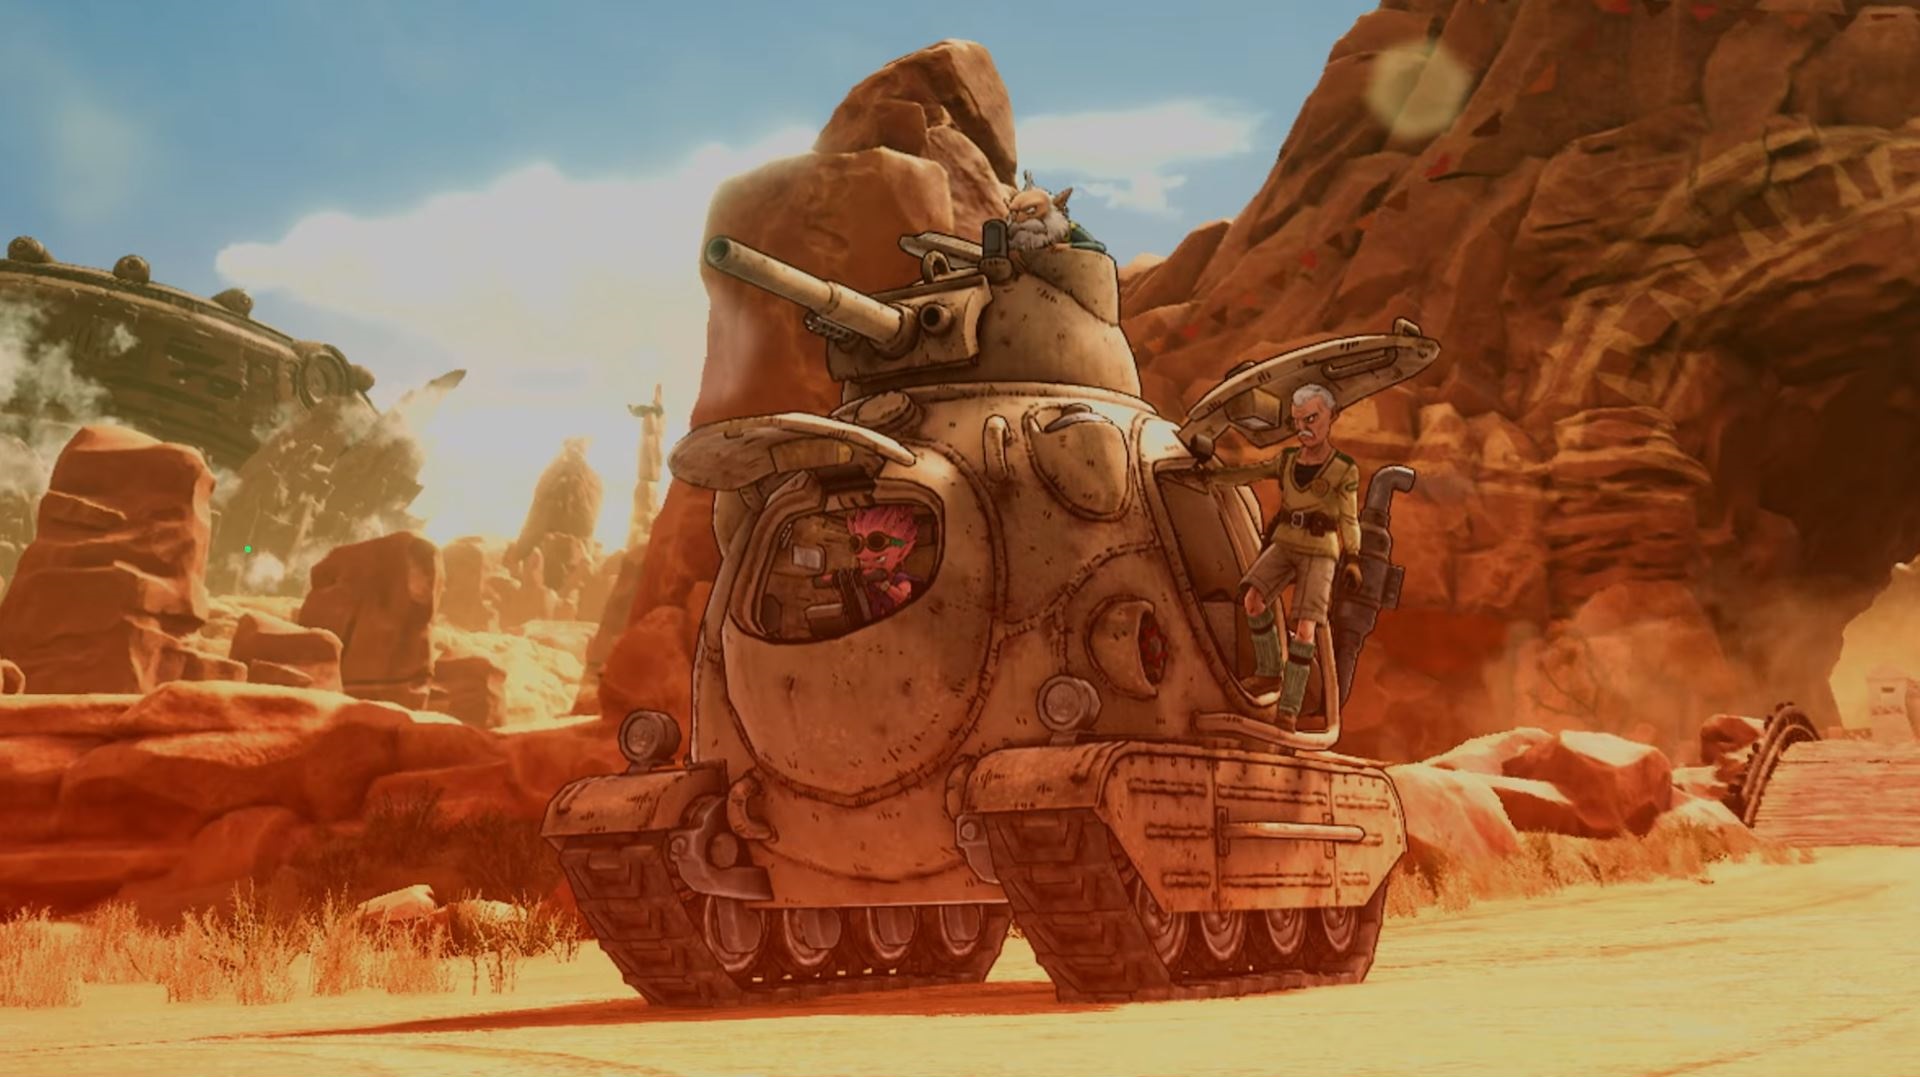 SAND LAND game reveals dev diary focused on enemies and vehicles